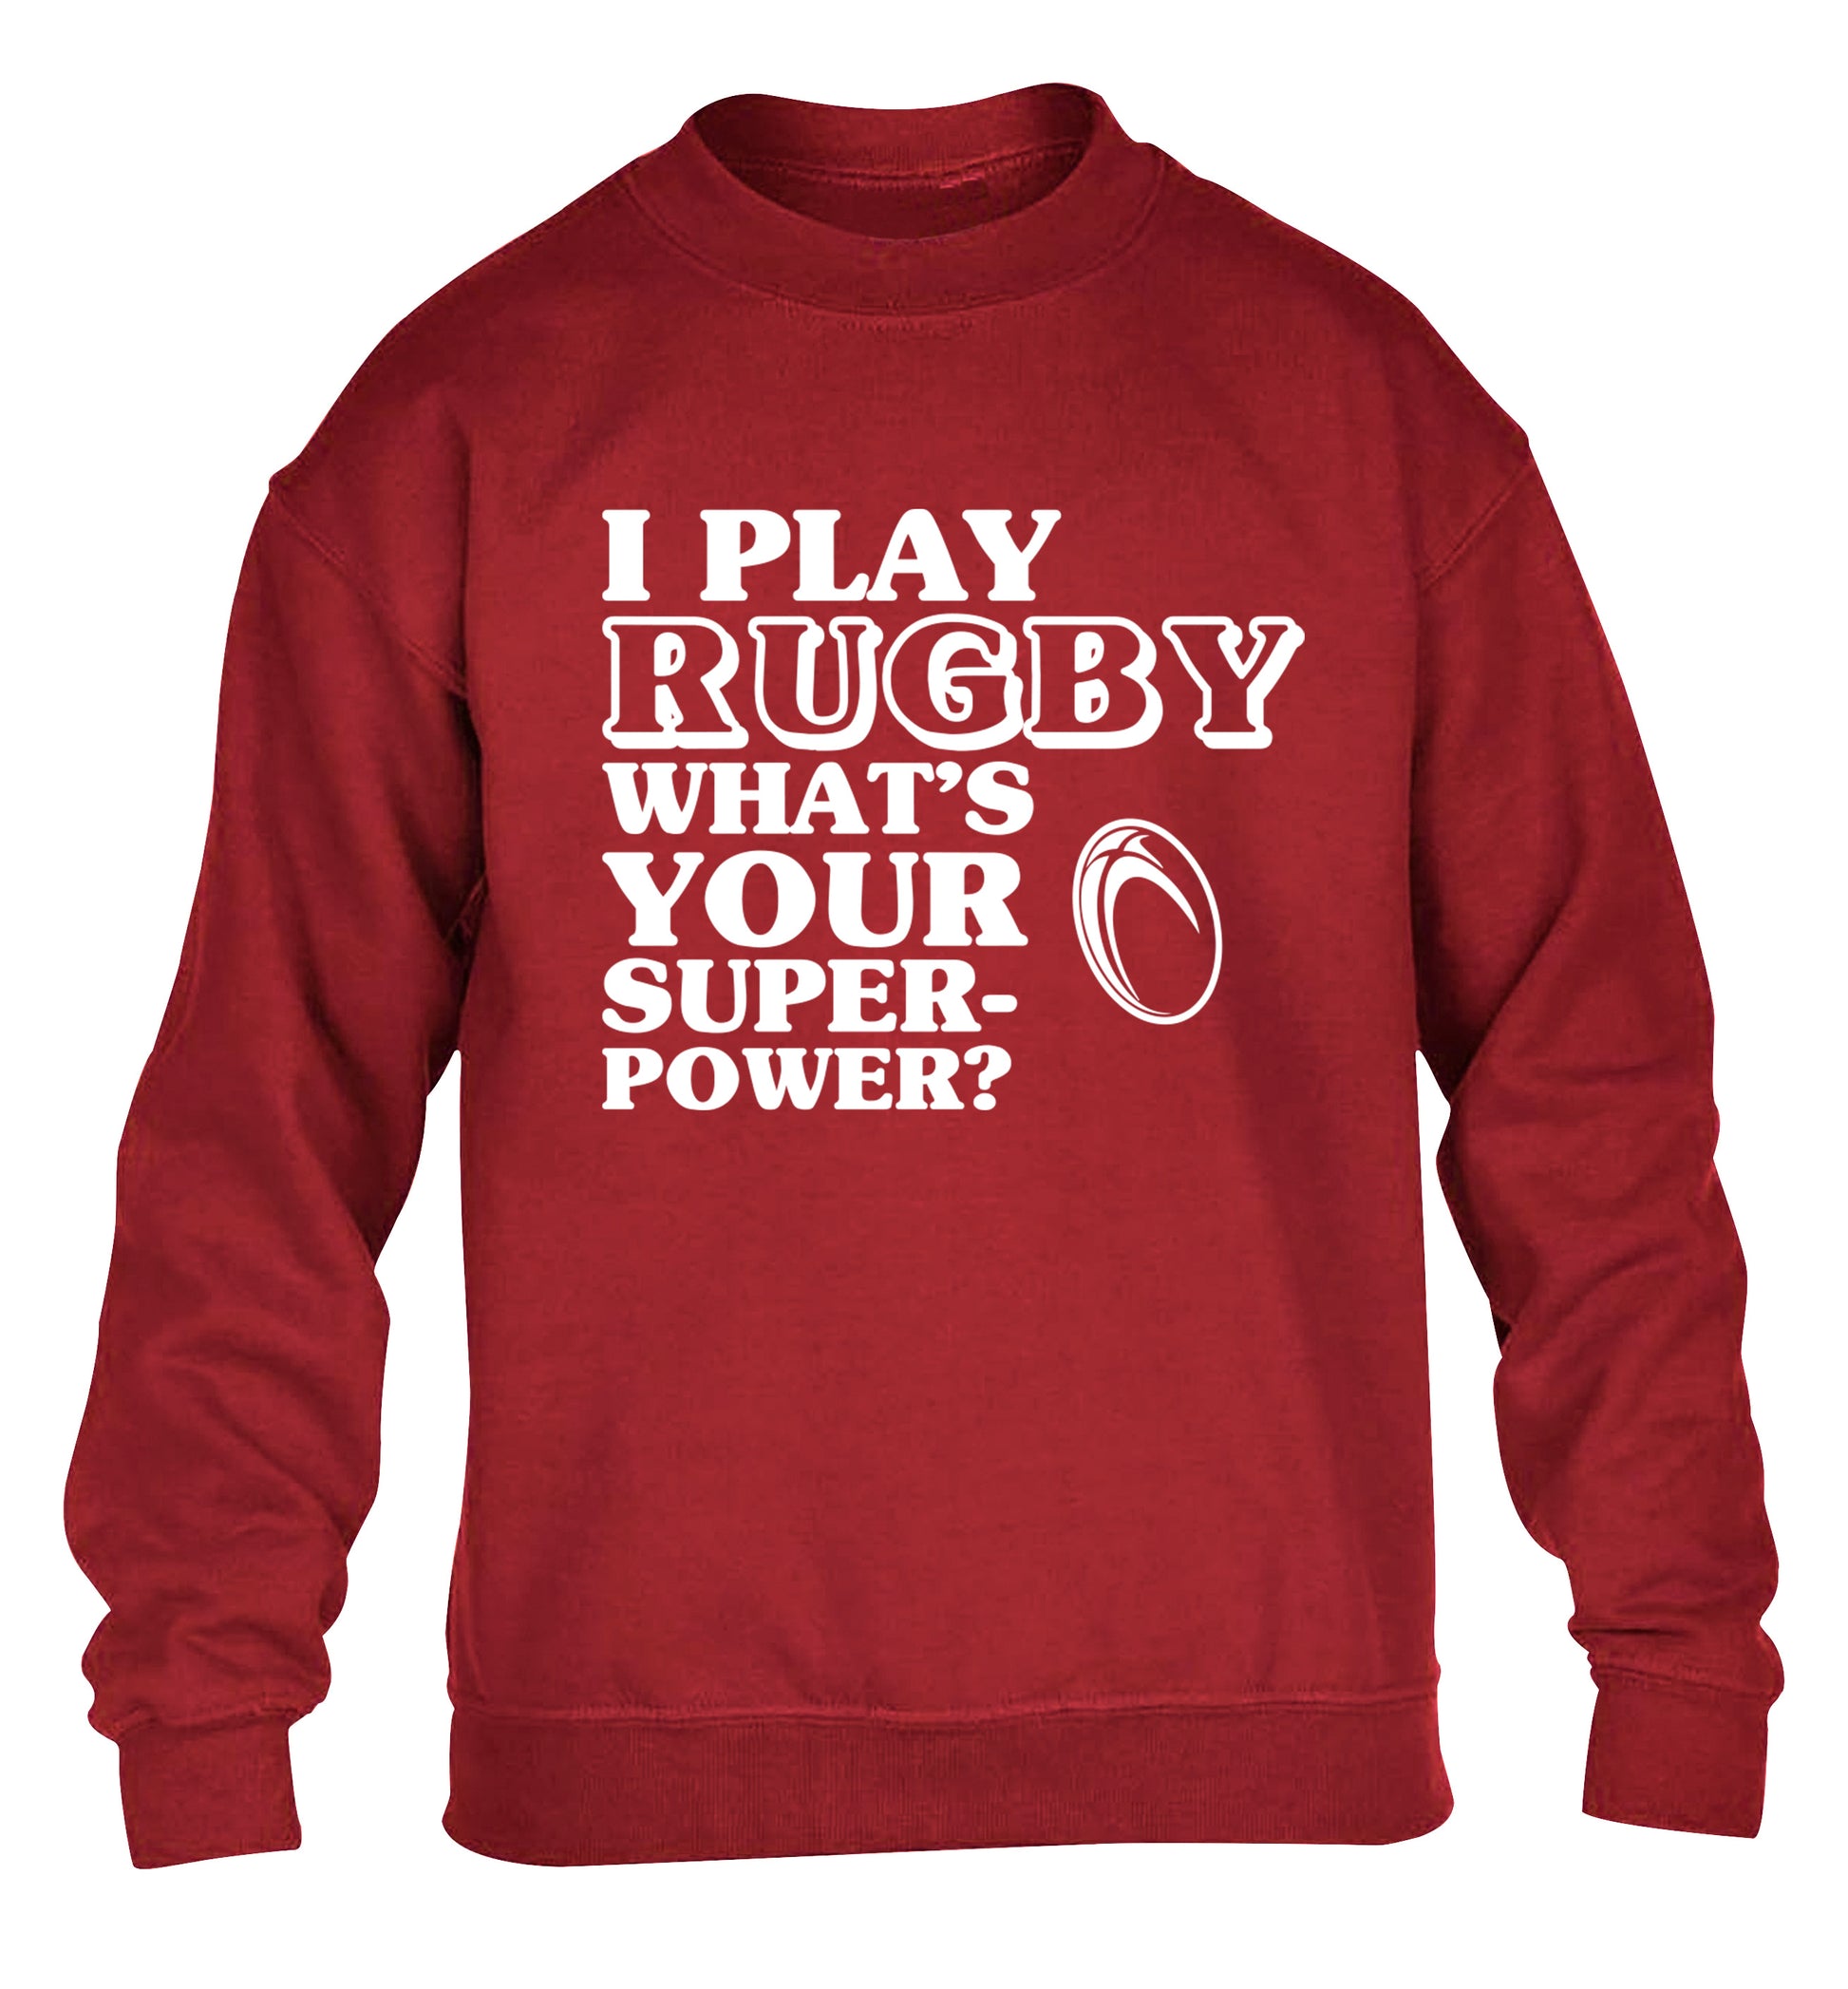 I play rugby what's your superpower? children's grey sweater 12-13 Years